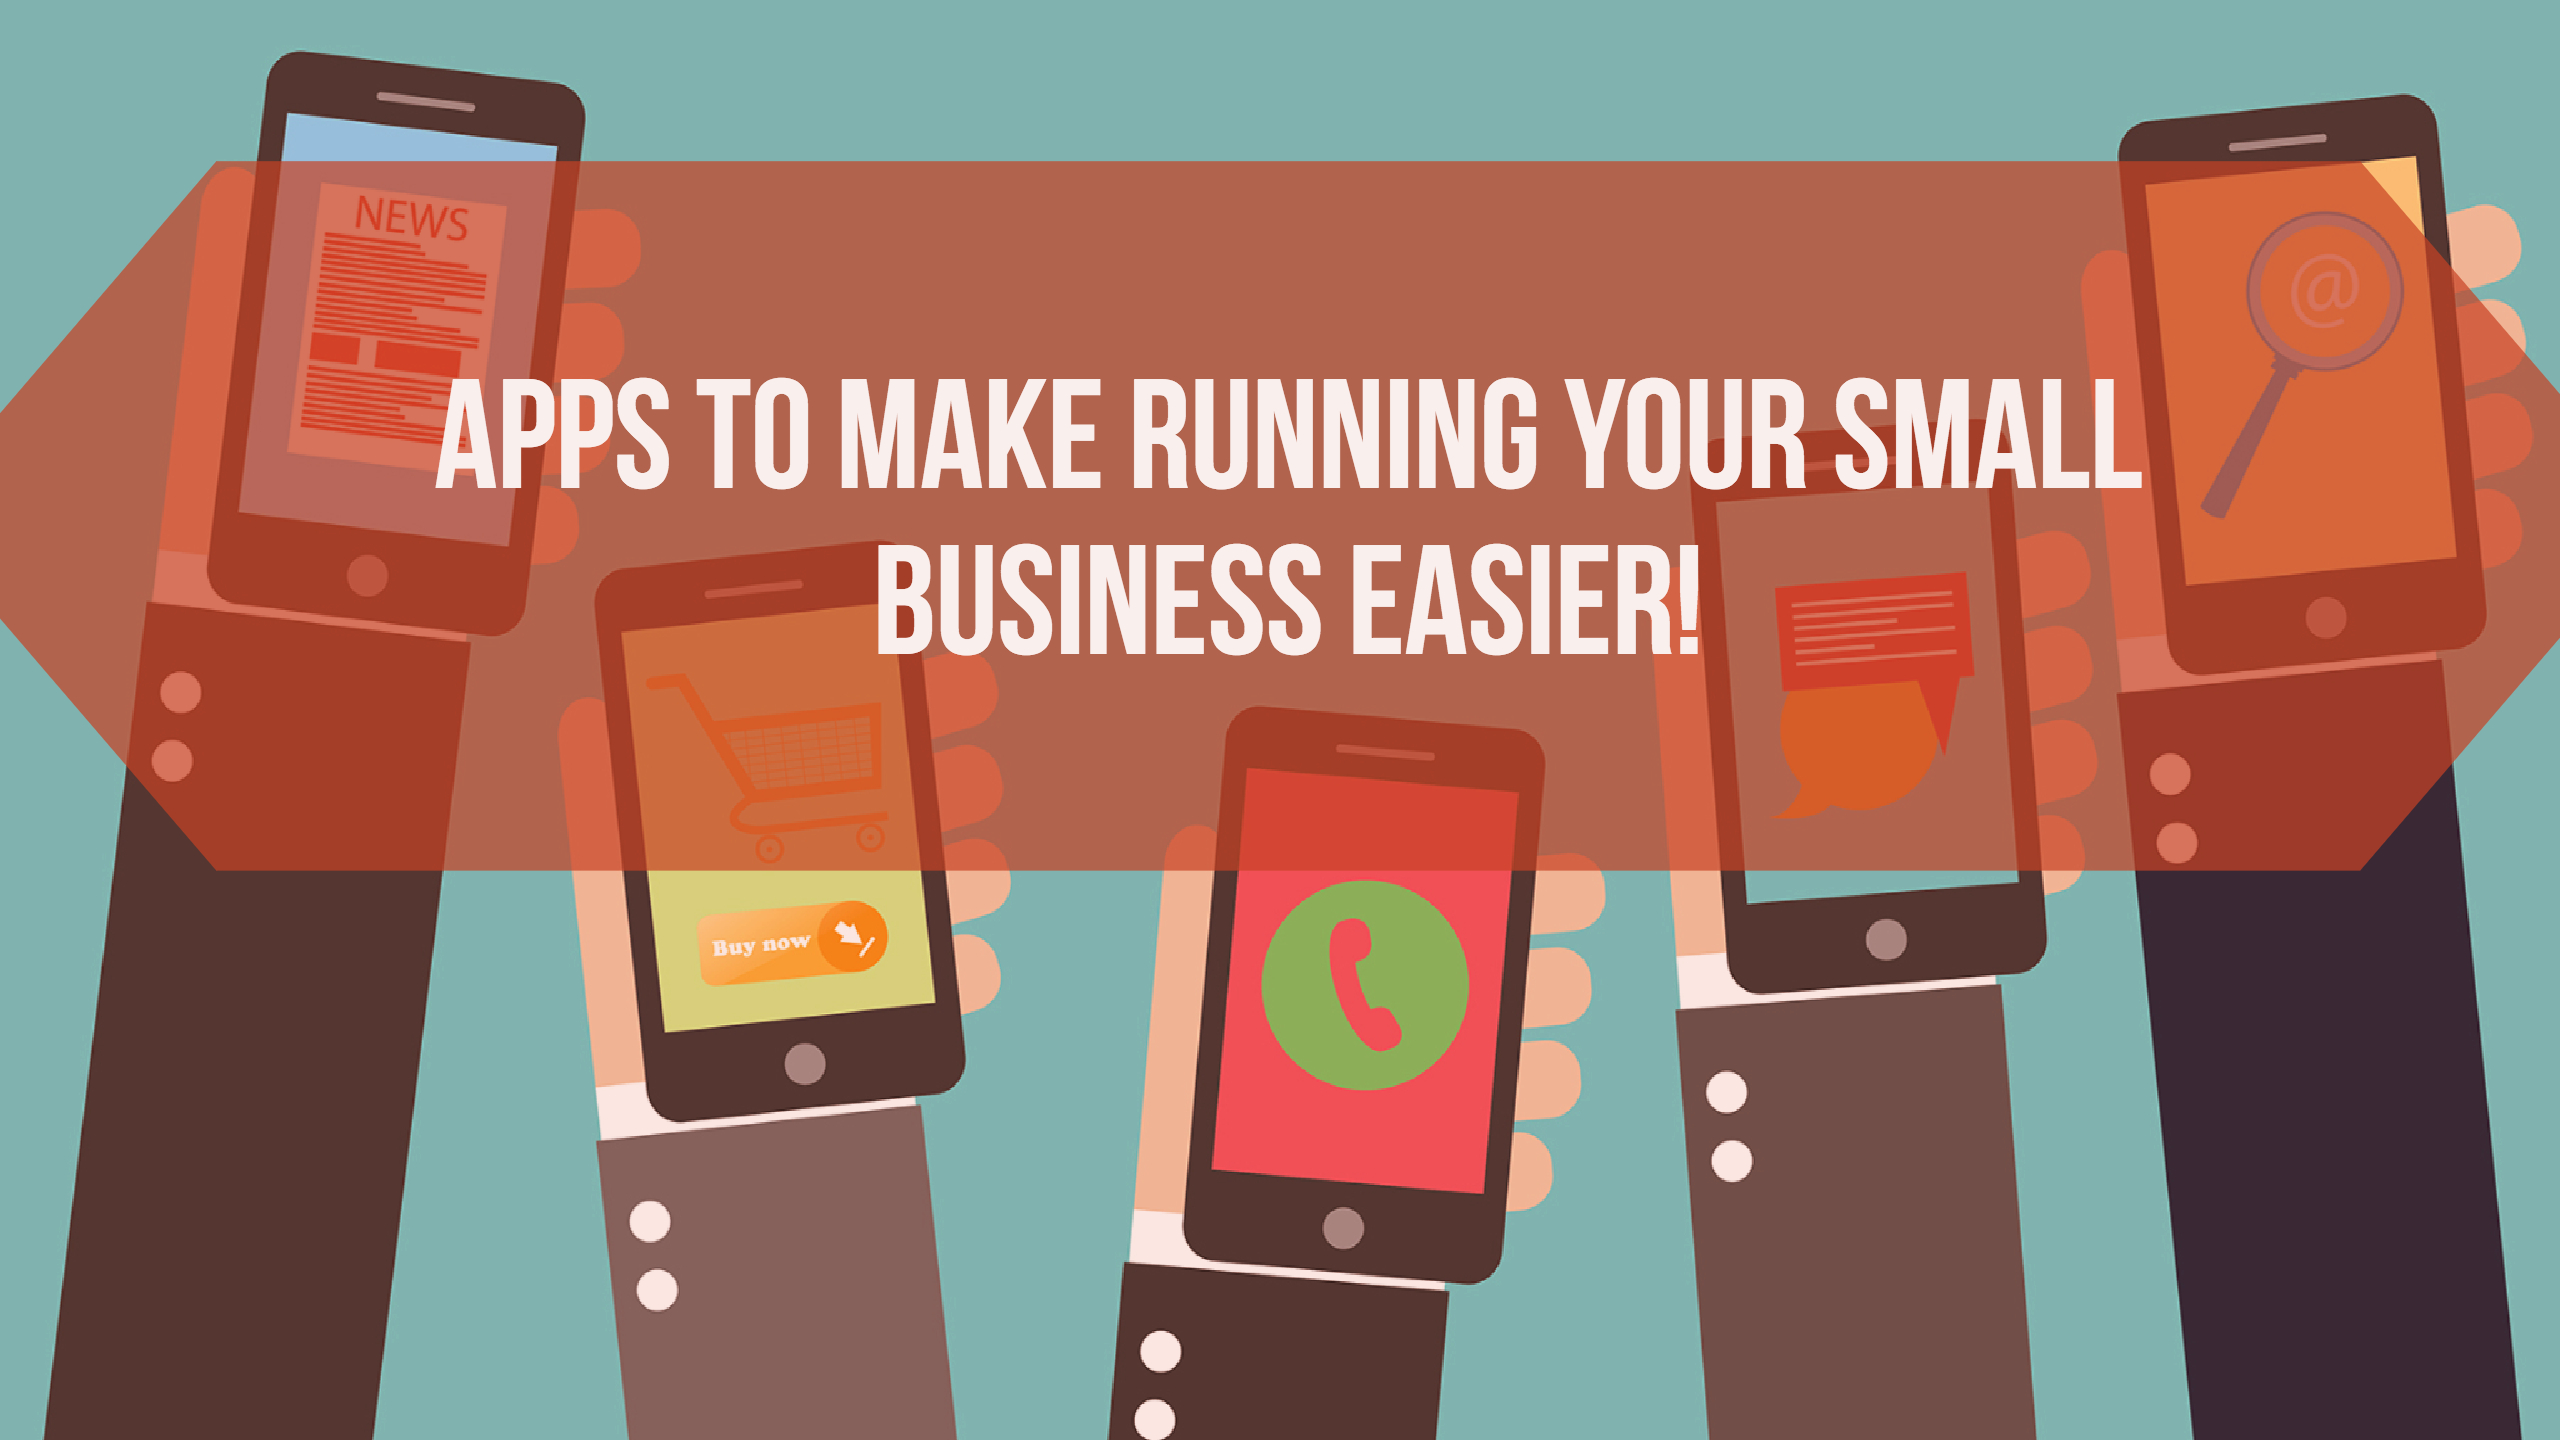 These 14 Apps Could Make Running Your Small Business So Much EASIER!